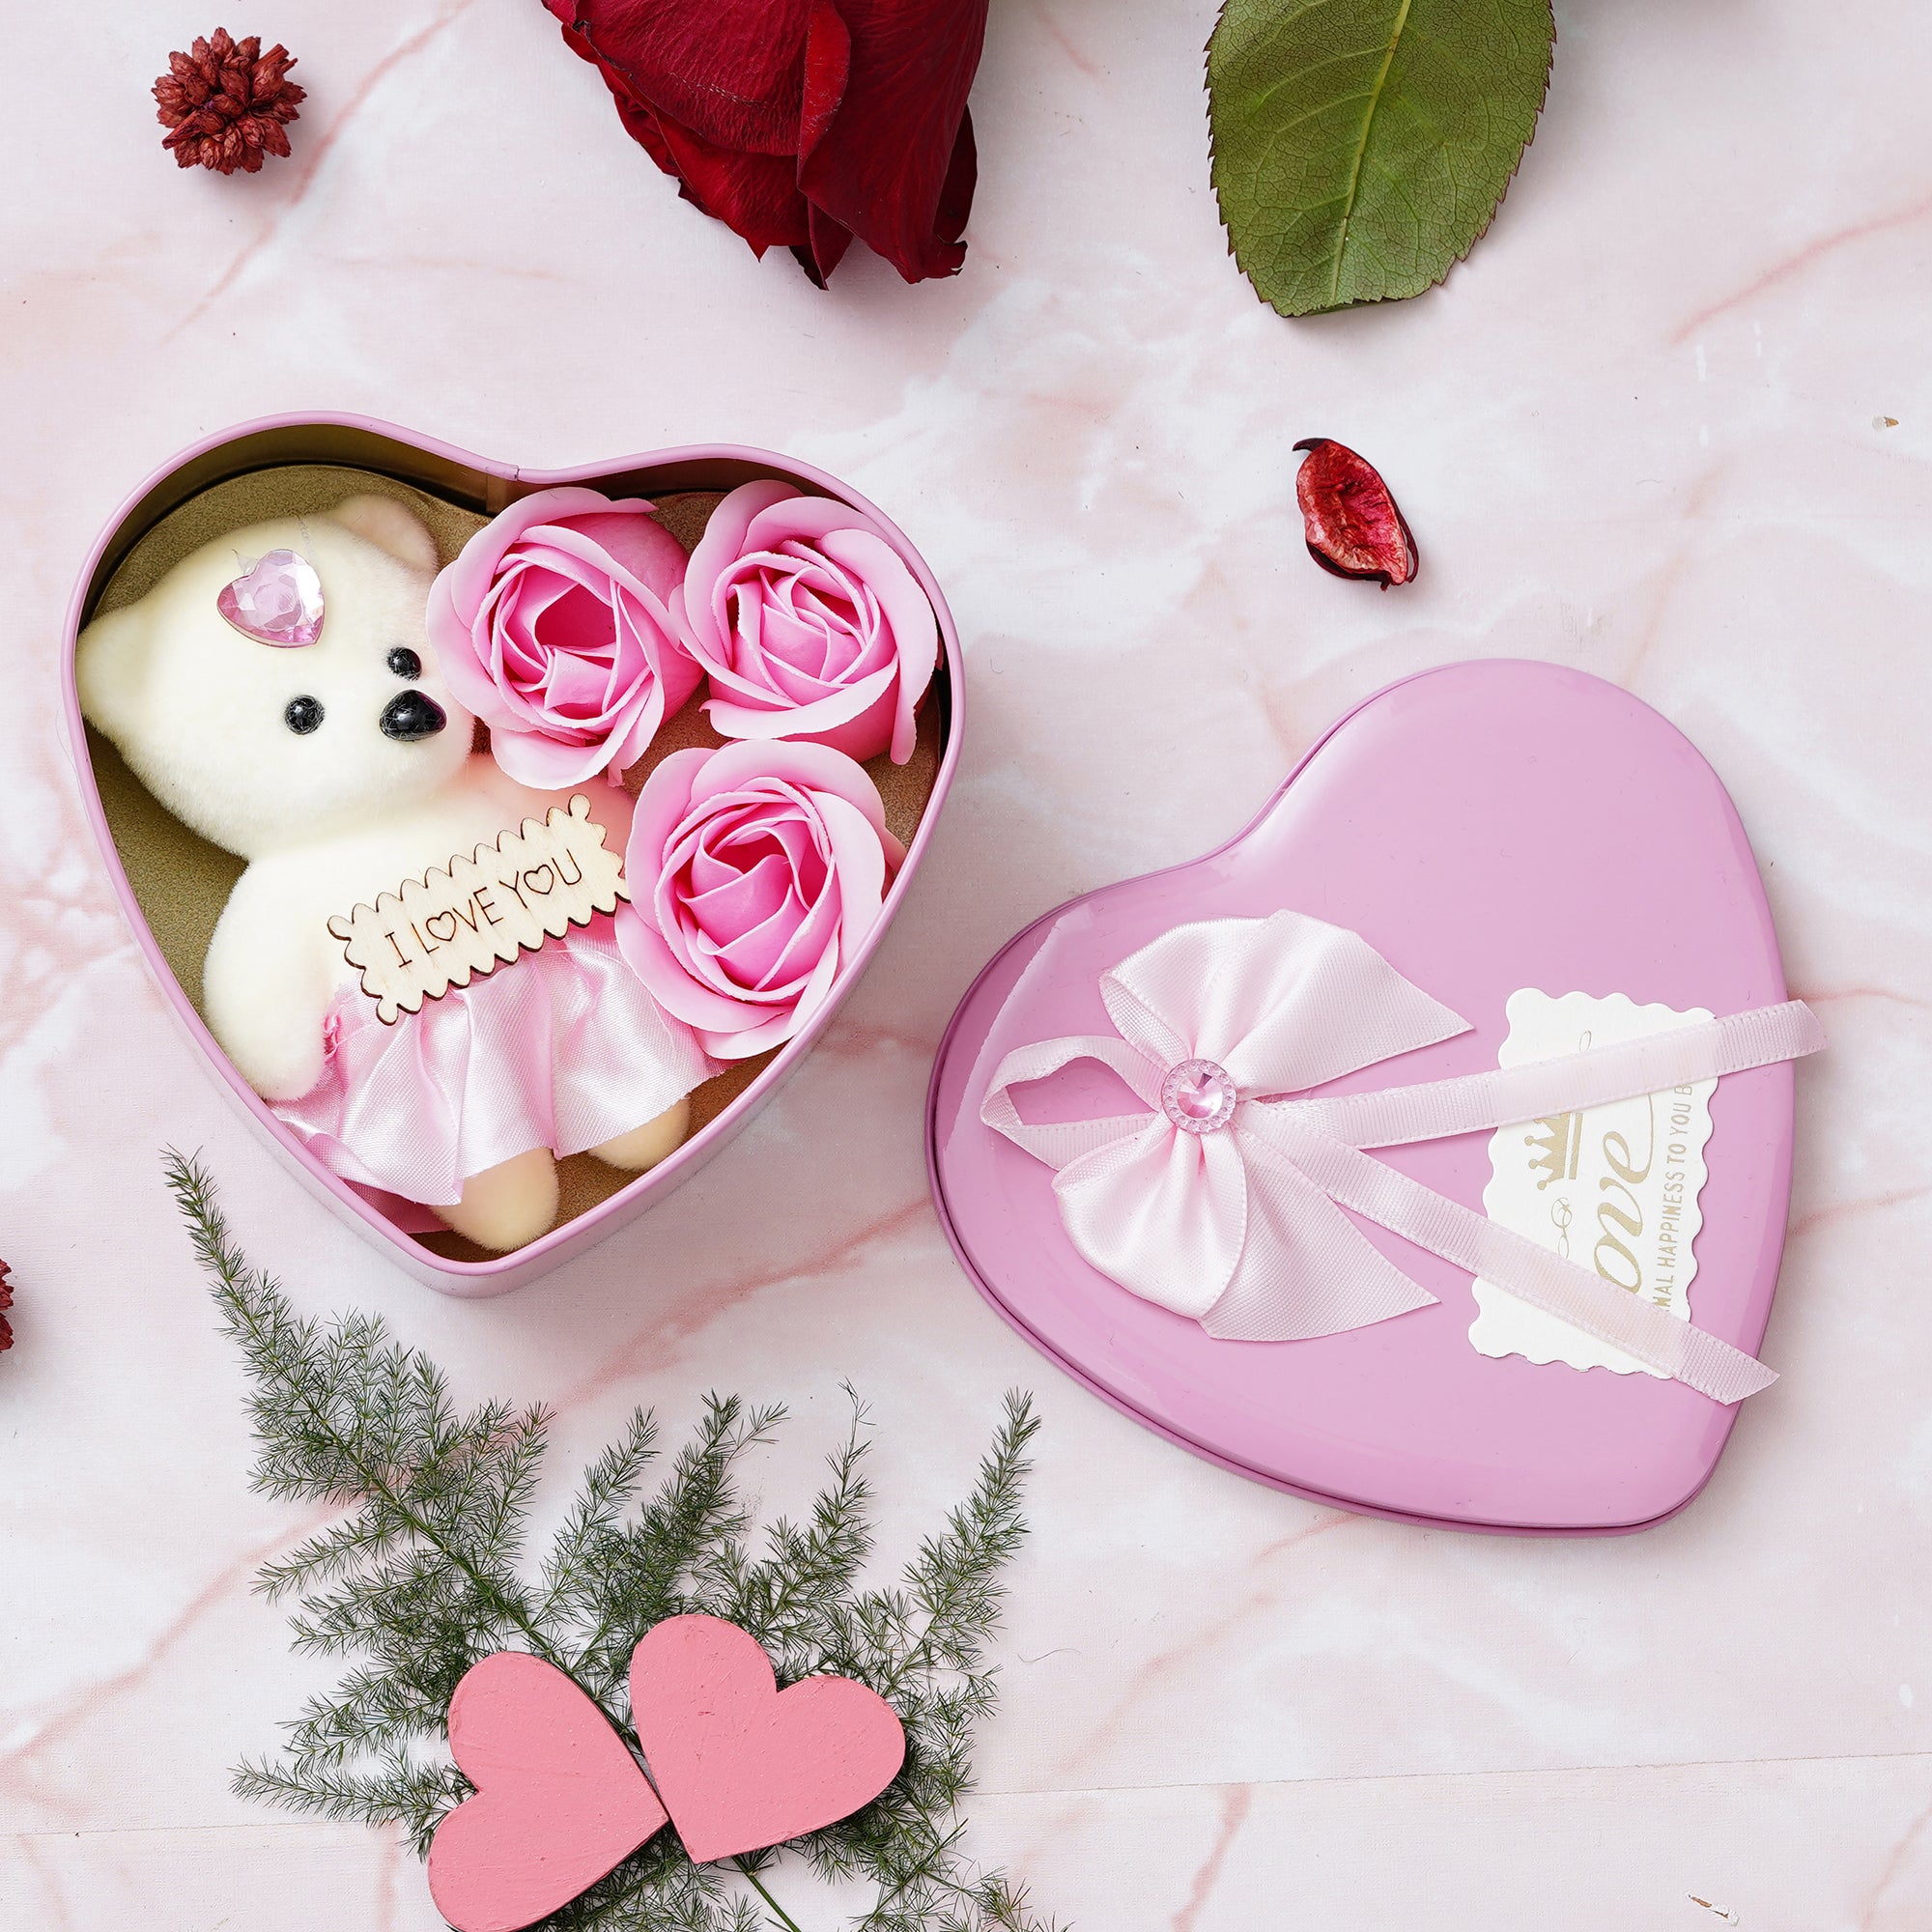 Valentine Combo of "Love" Wooden Photo Frame With Red Stand, Pink Heart Shaped Gift Box with Teddy and Roses 3